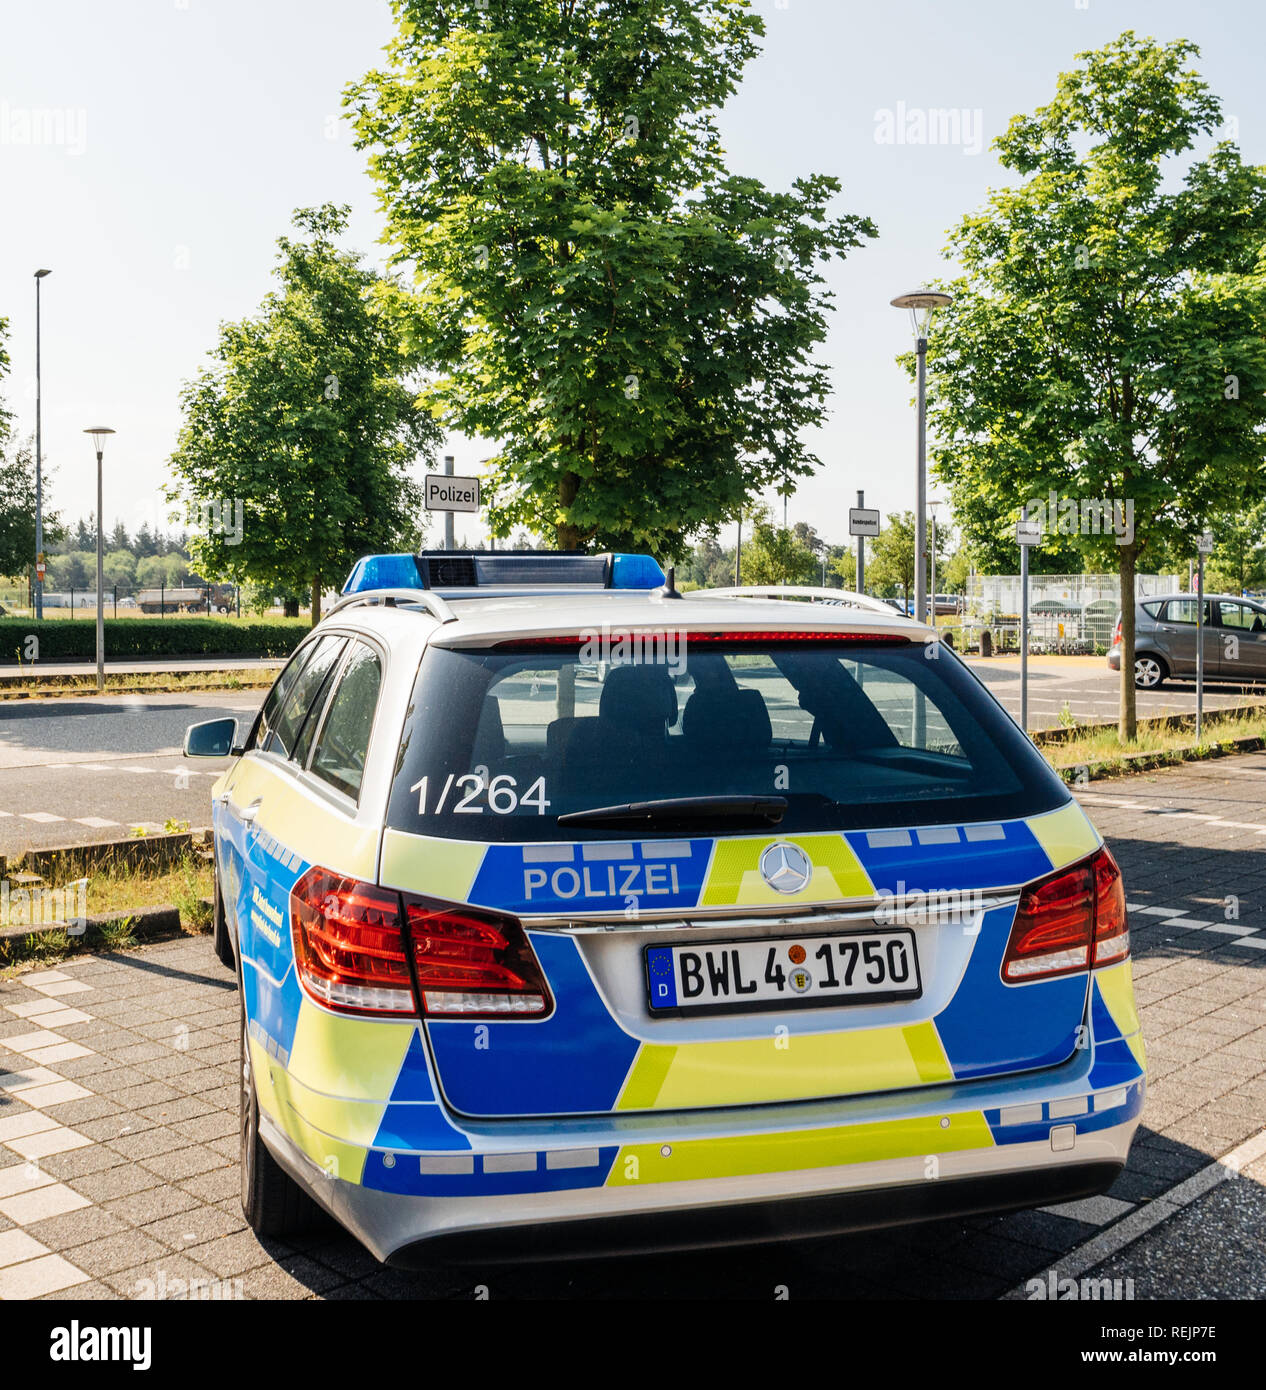 BADEN, GERMANY - MAY 11, 2018: Rear view of Polizei Police car Mercedes-Benz blue car parked in front of Karlsruhe Baden-Baden Airport (IATA: FKB, ICAO: EDSB) Stock Photo